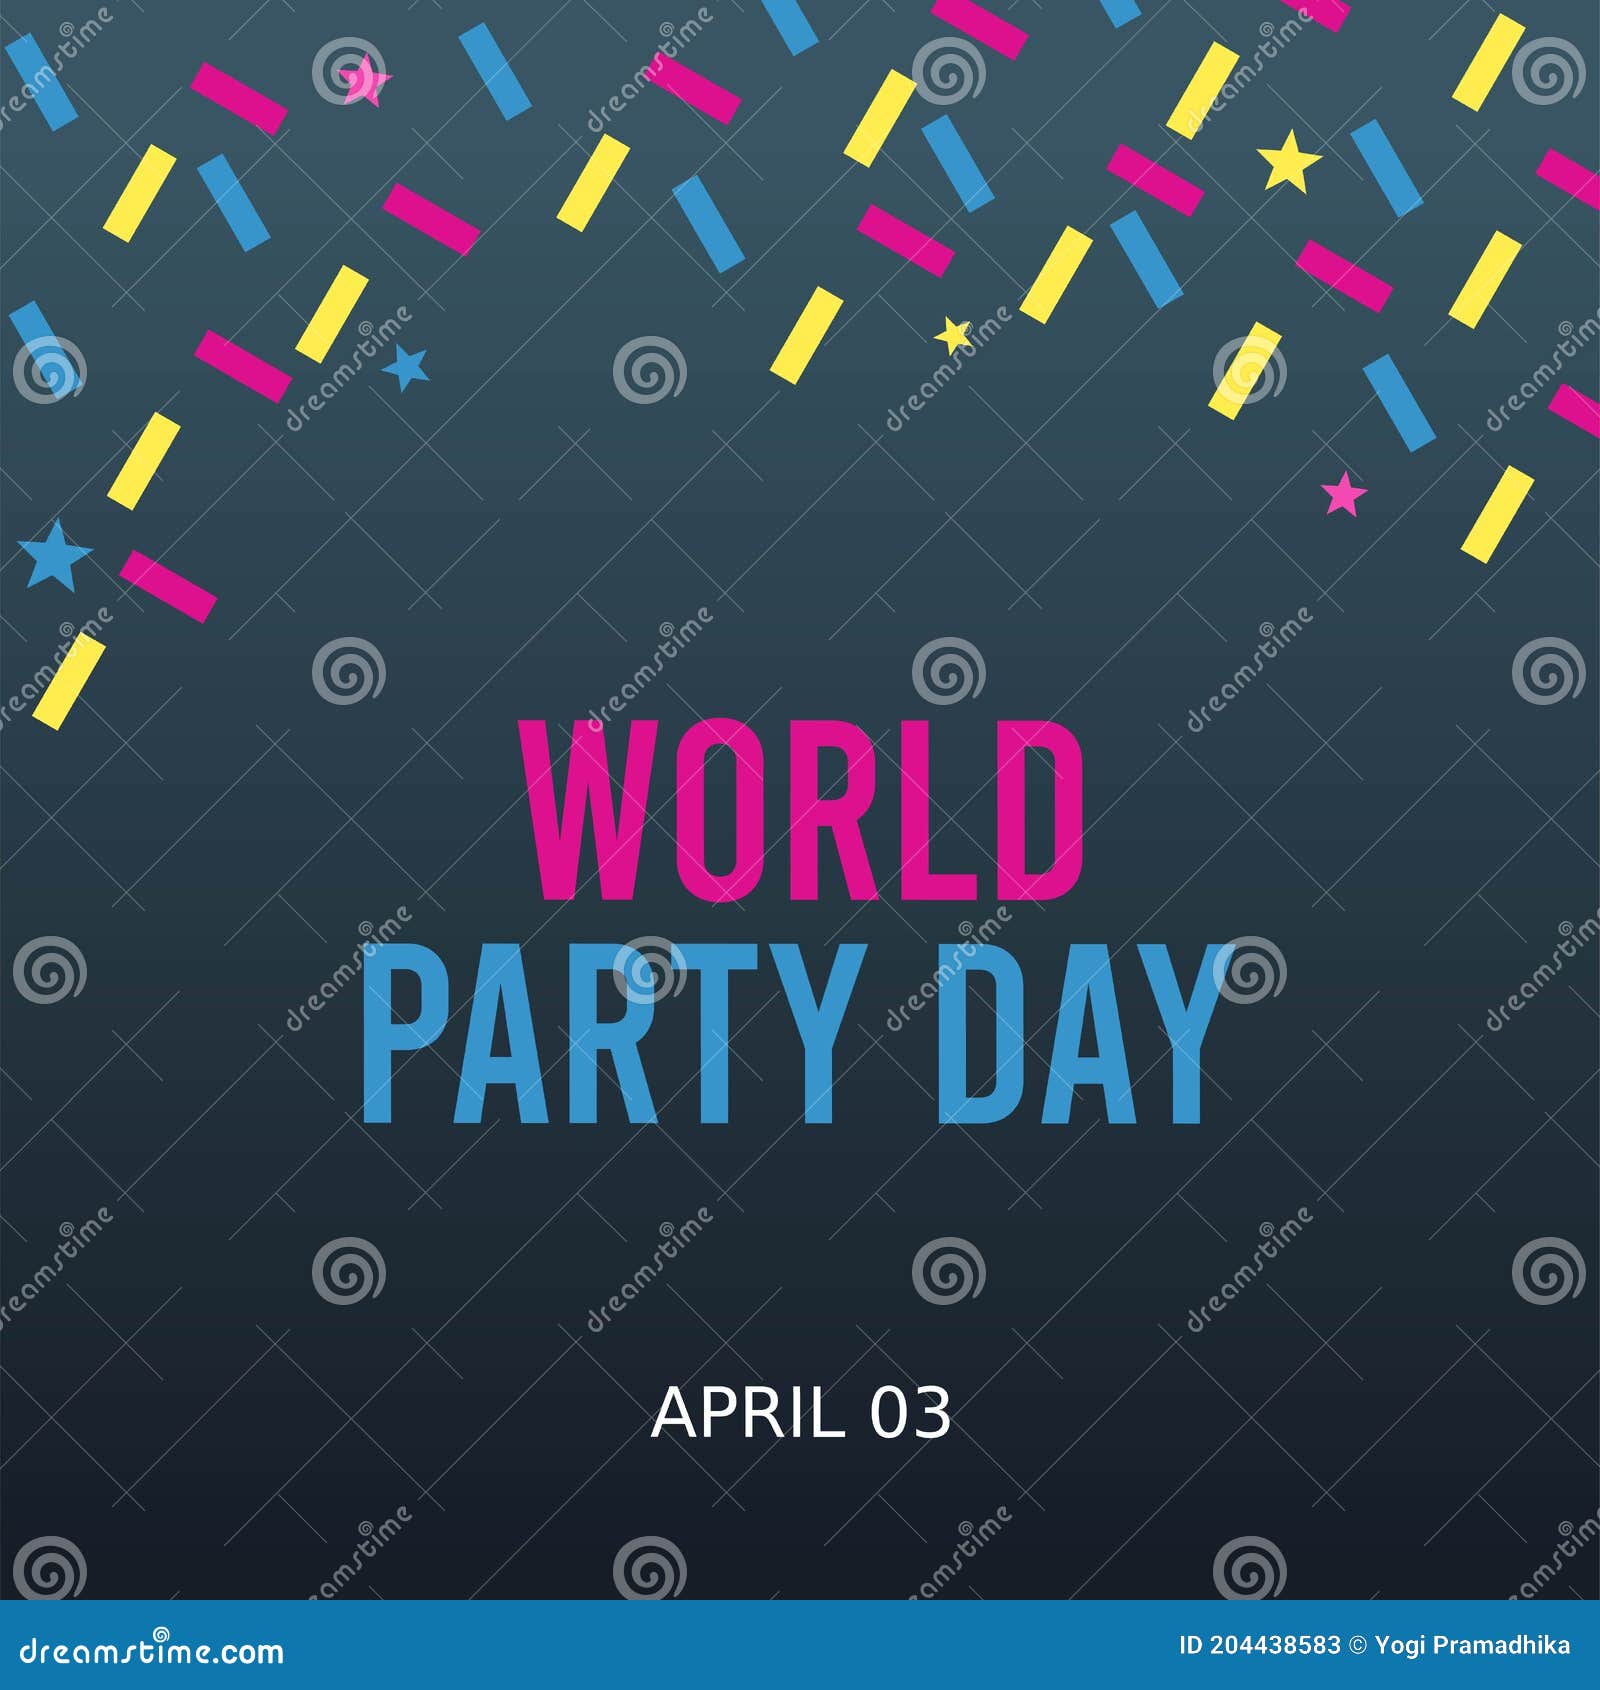 World Party Day Vector Illustration Stock Vector Illustration of